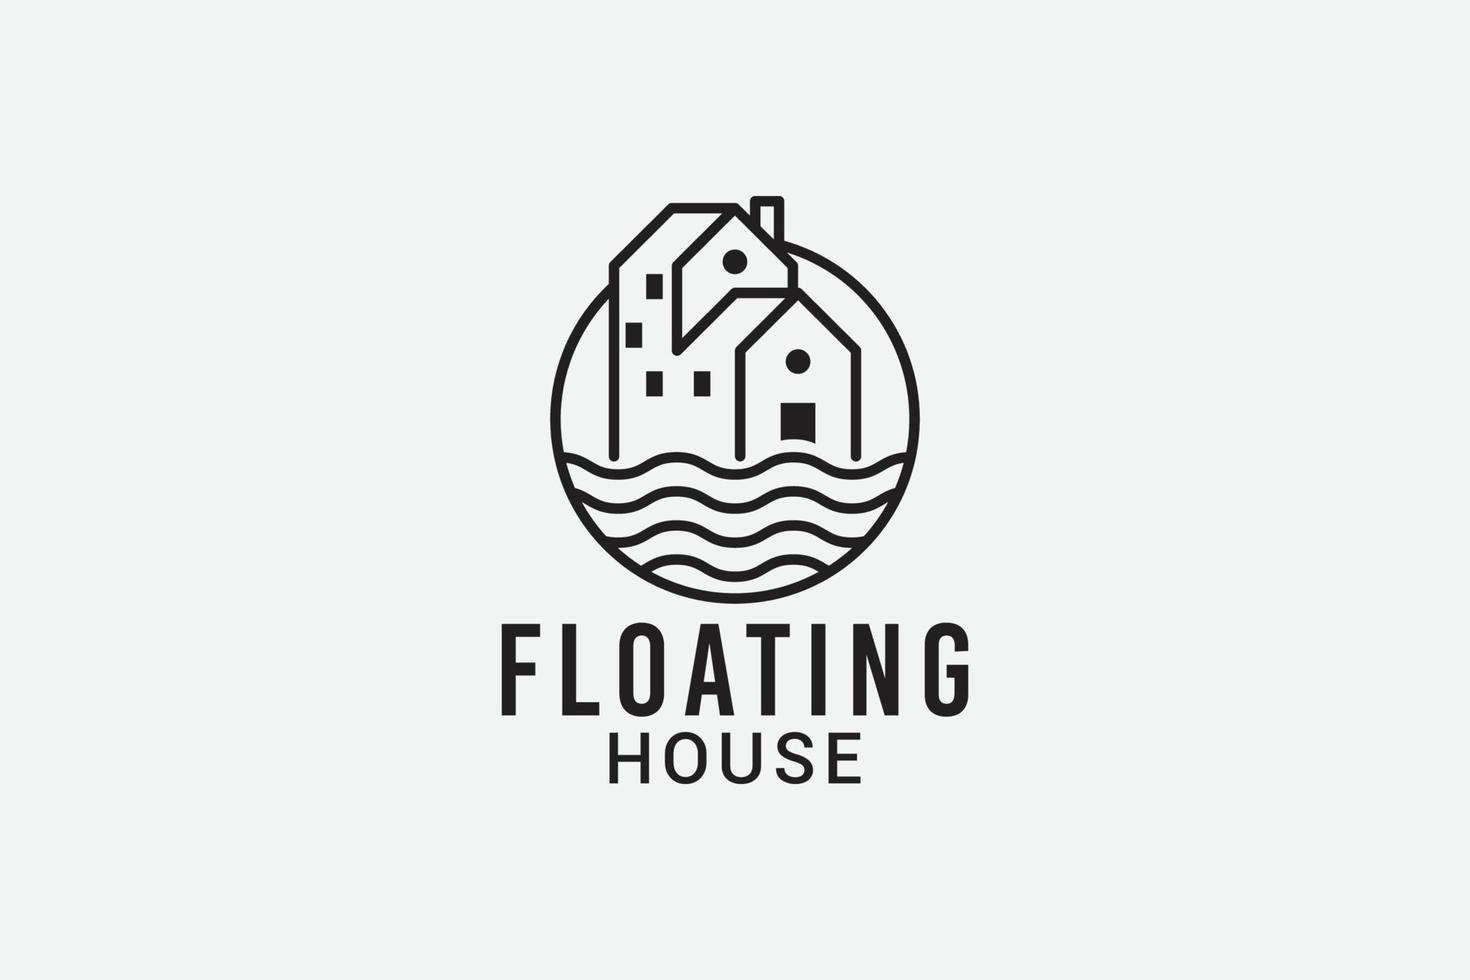 floating house logo with simple house in line style for any business especially for housing, real estate, apartment, etc. vector